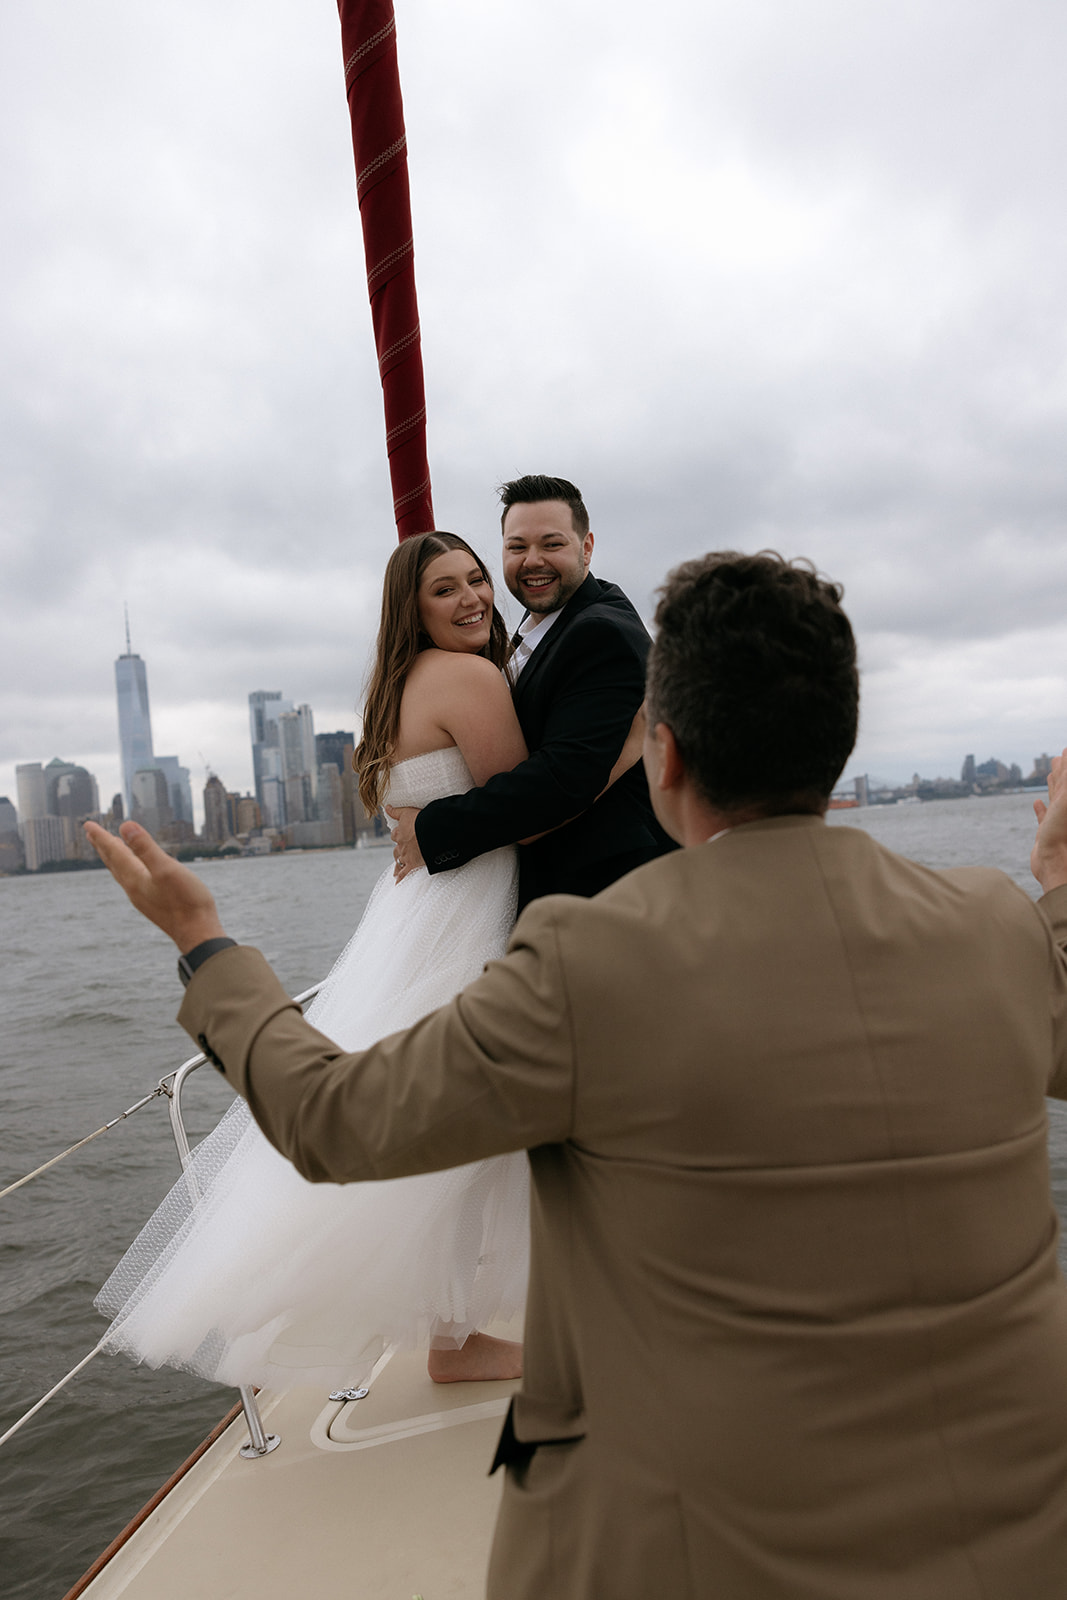 A couple who eloped on a NYC boat say their vows 